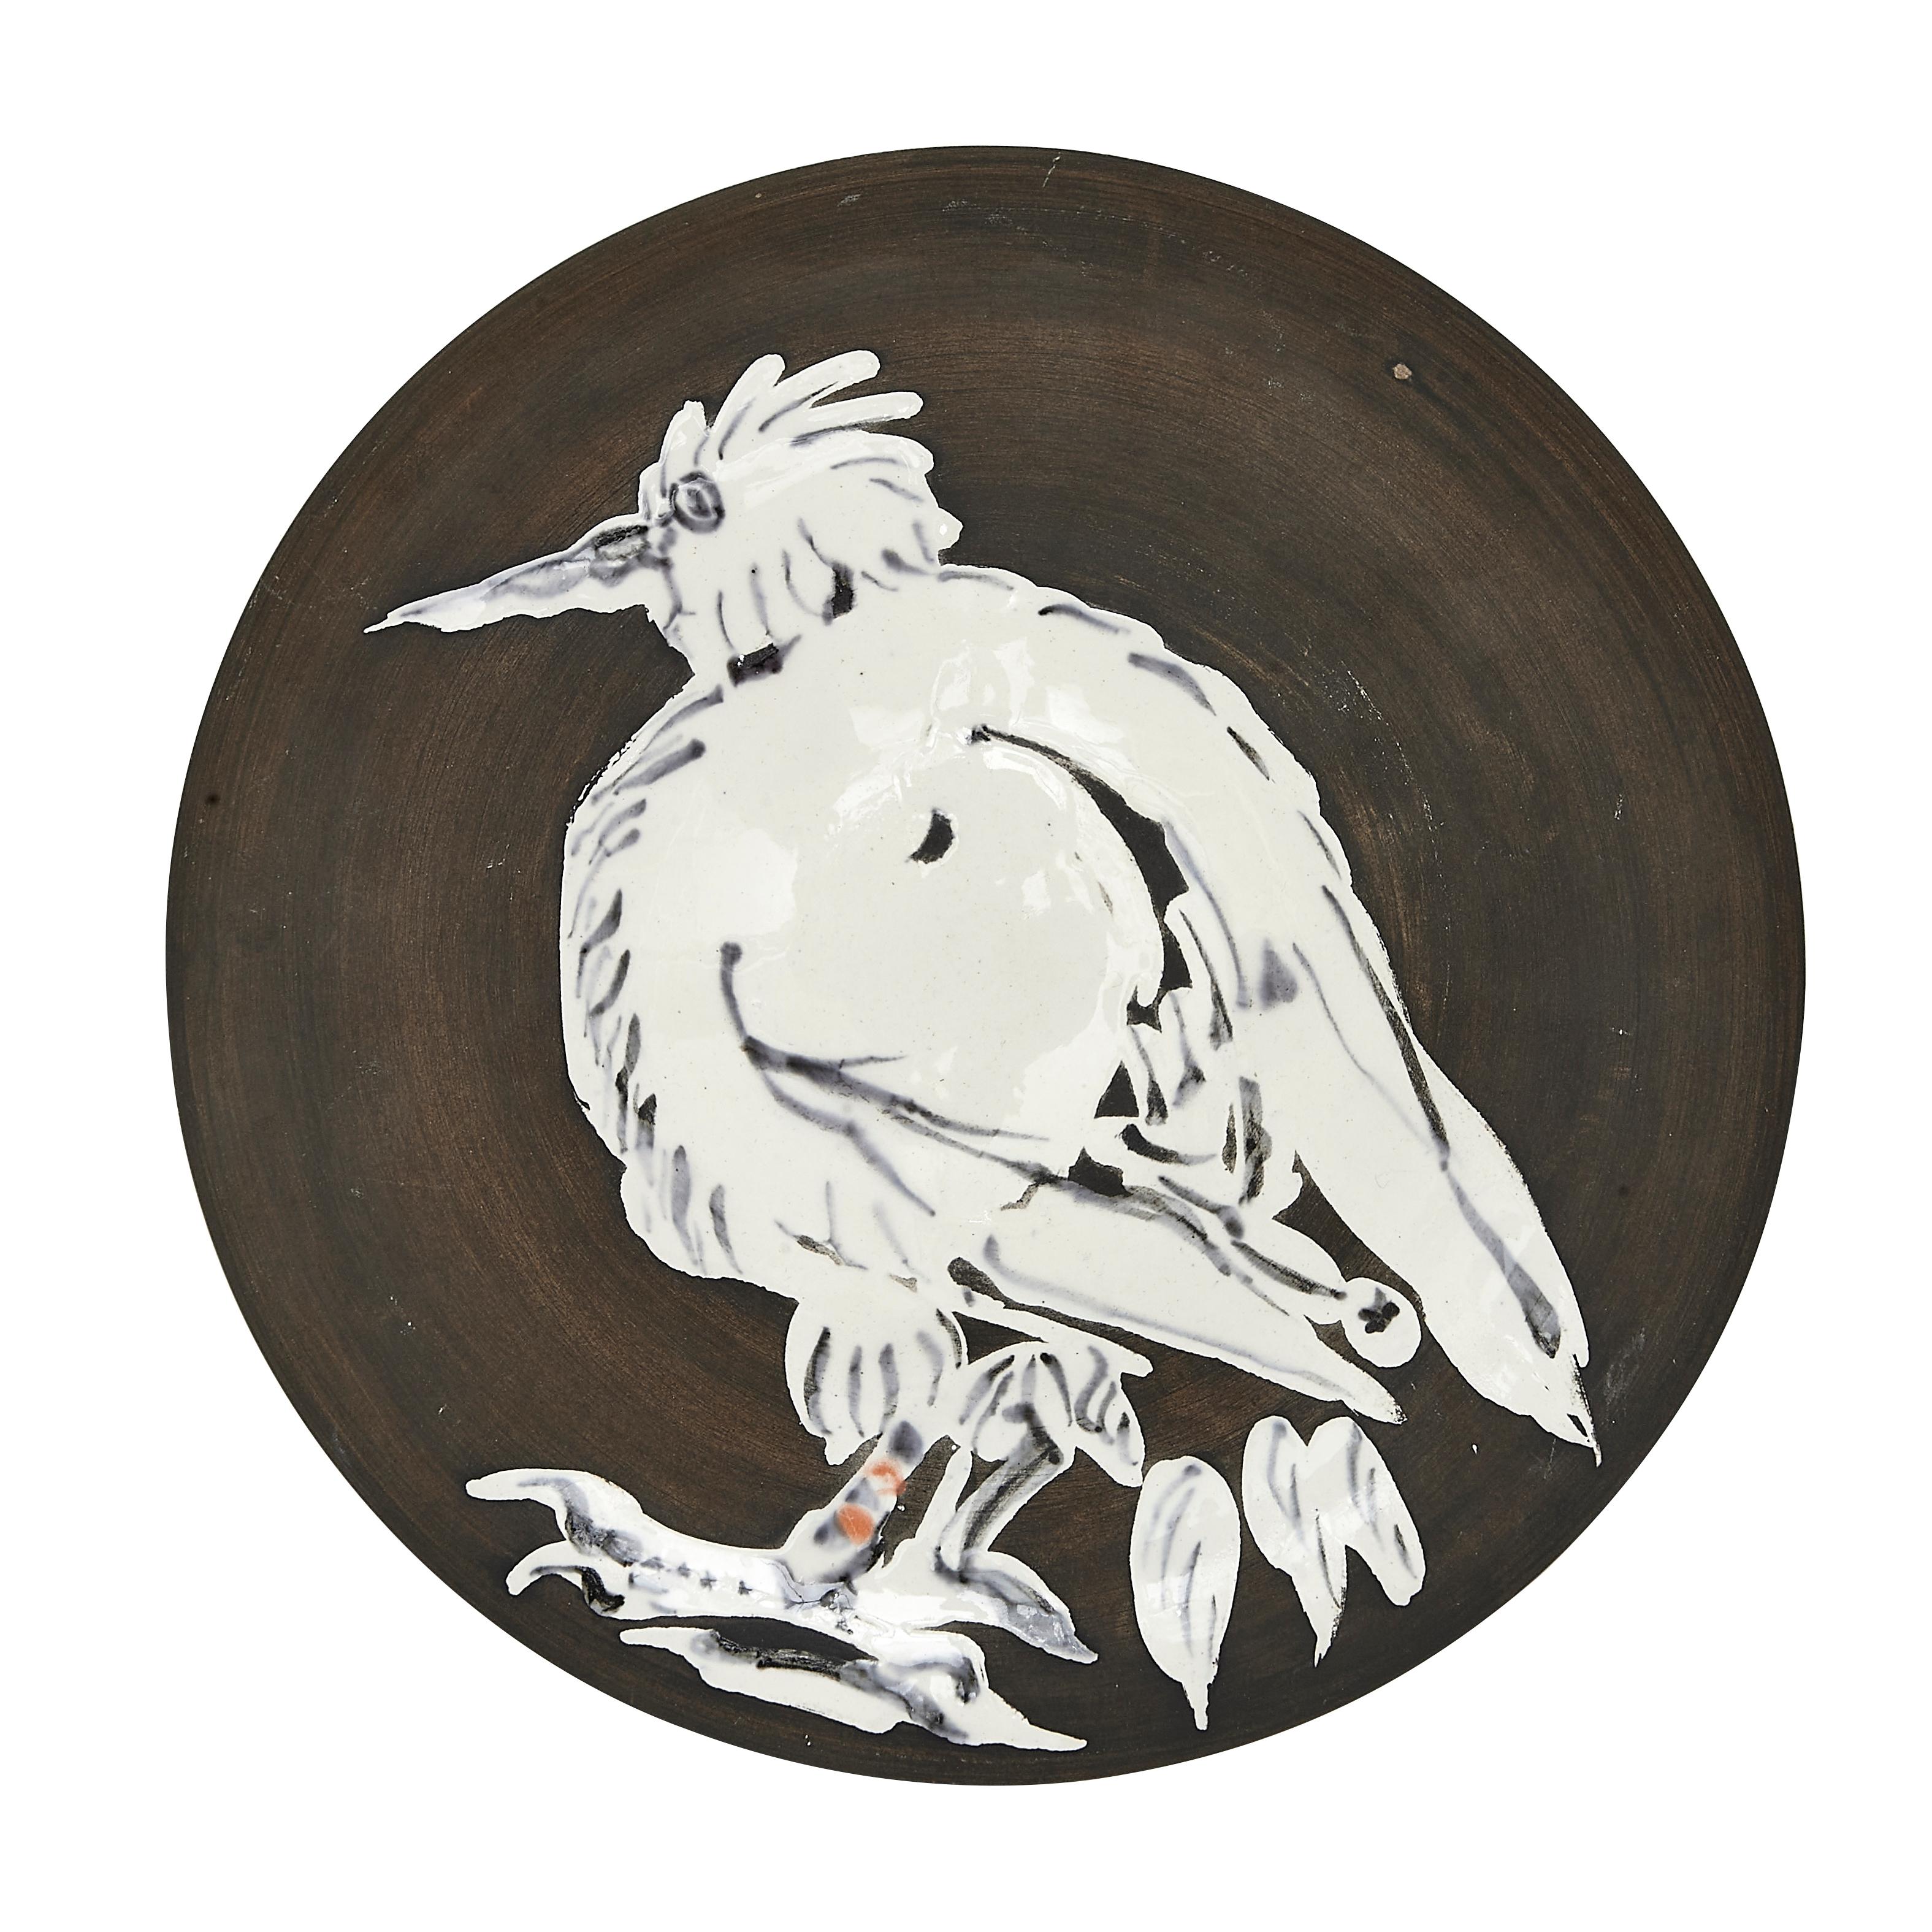 PABLO PICASSO (1881-1973) 
Oiseau No. 76 (A. R. 481)

Terre de faïence plate, painted in colors and partially glazed, 1963, numbered 116/200 and inscribed 'No 76', 'Edition Picasso' and 'Madoura'